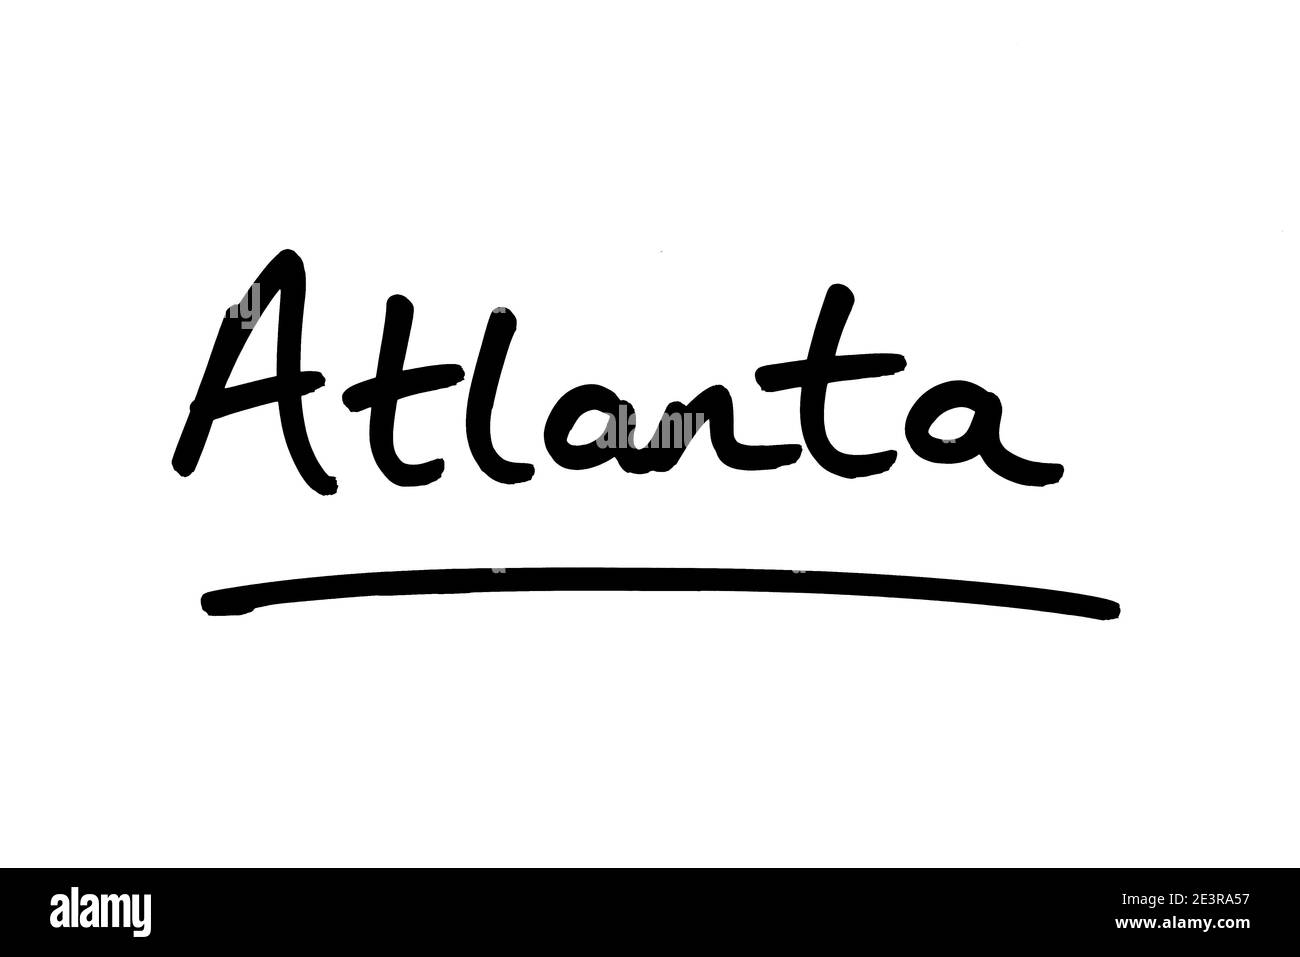 Atlanta - the capital city of the state of Georgia, in the United States of America. Stock Photo